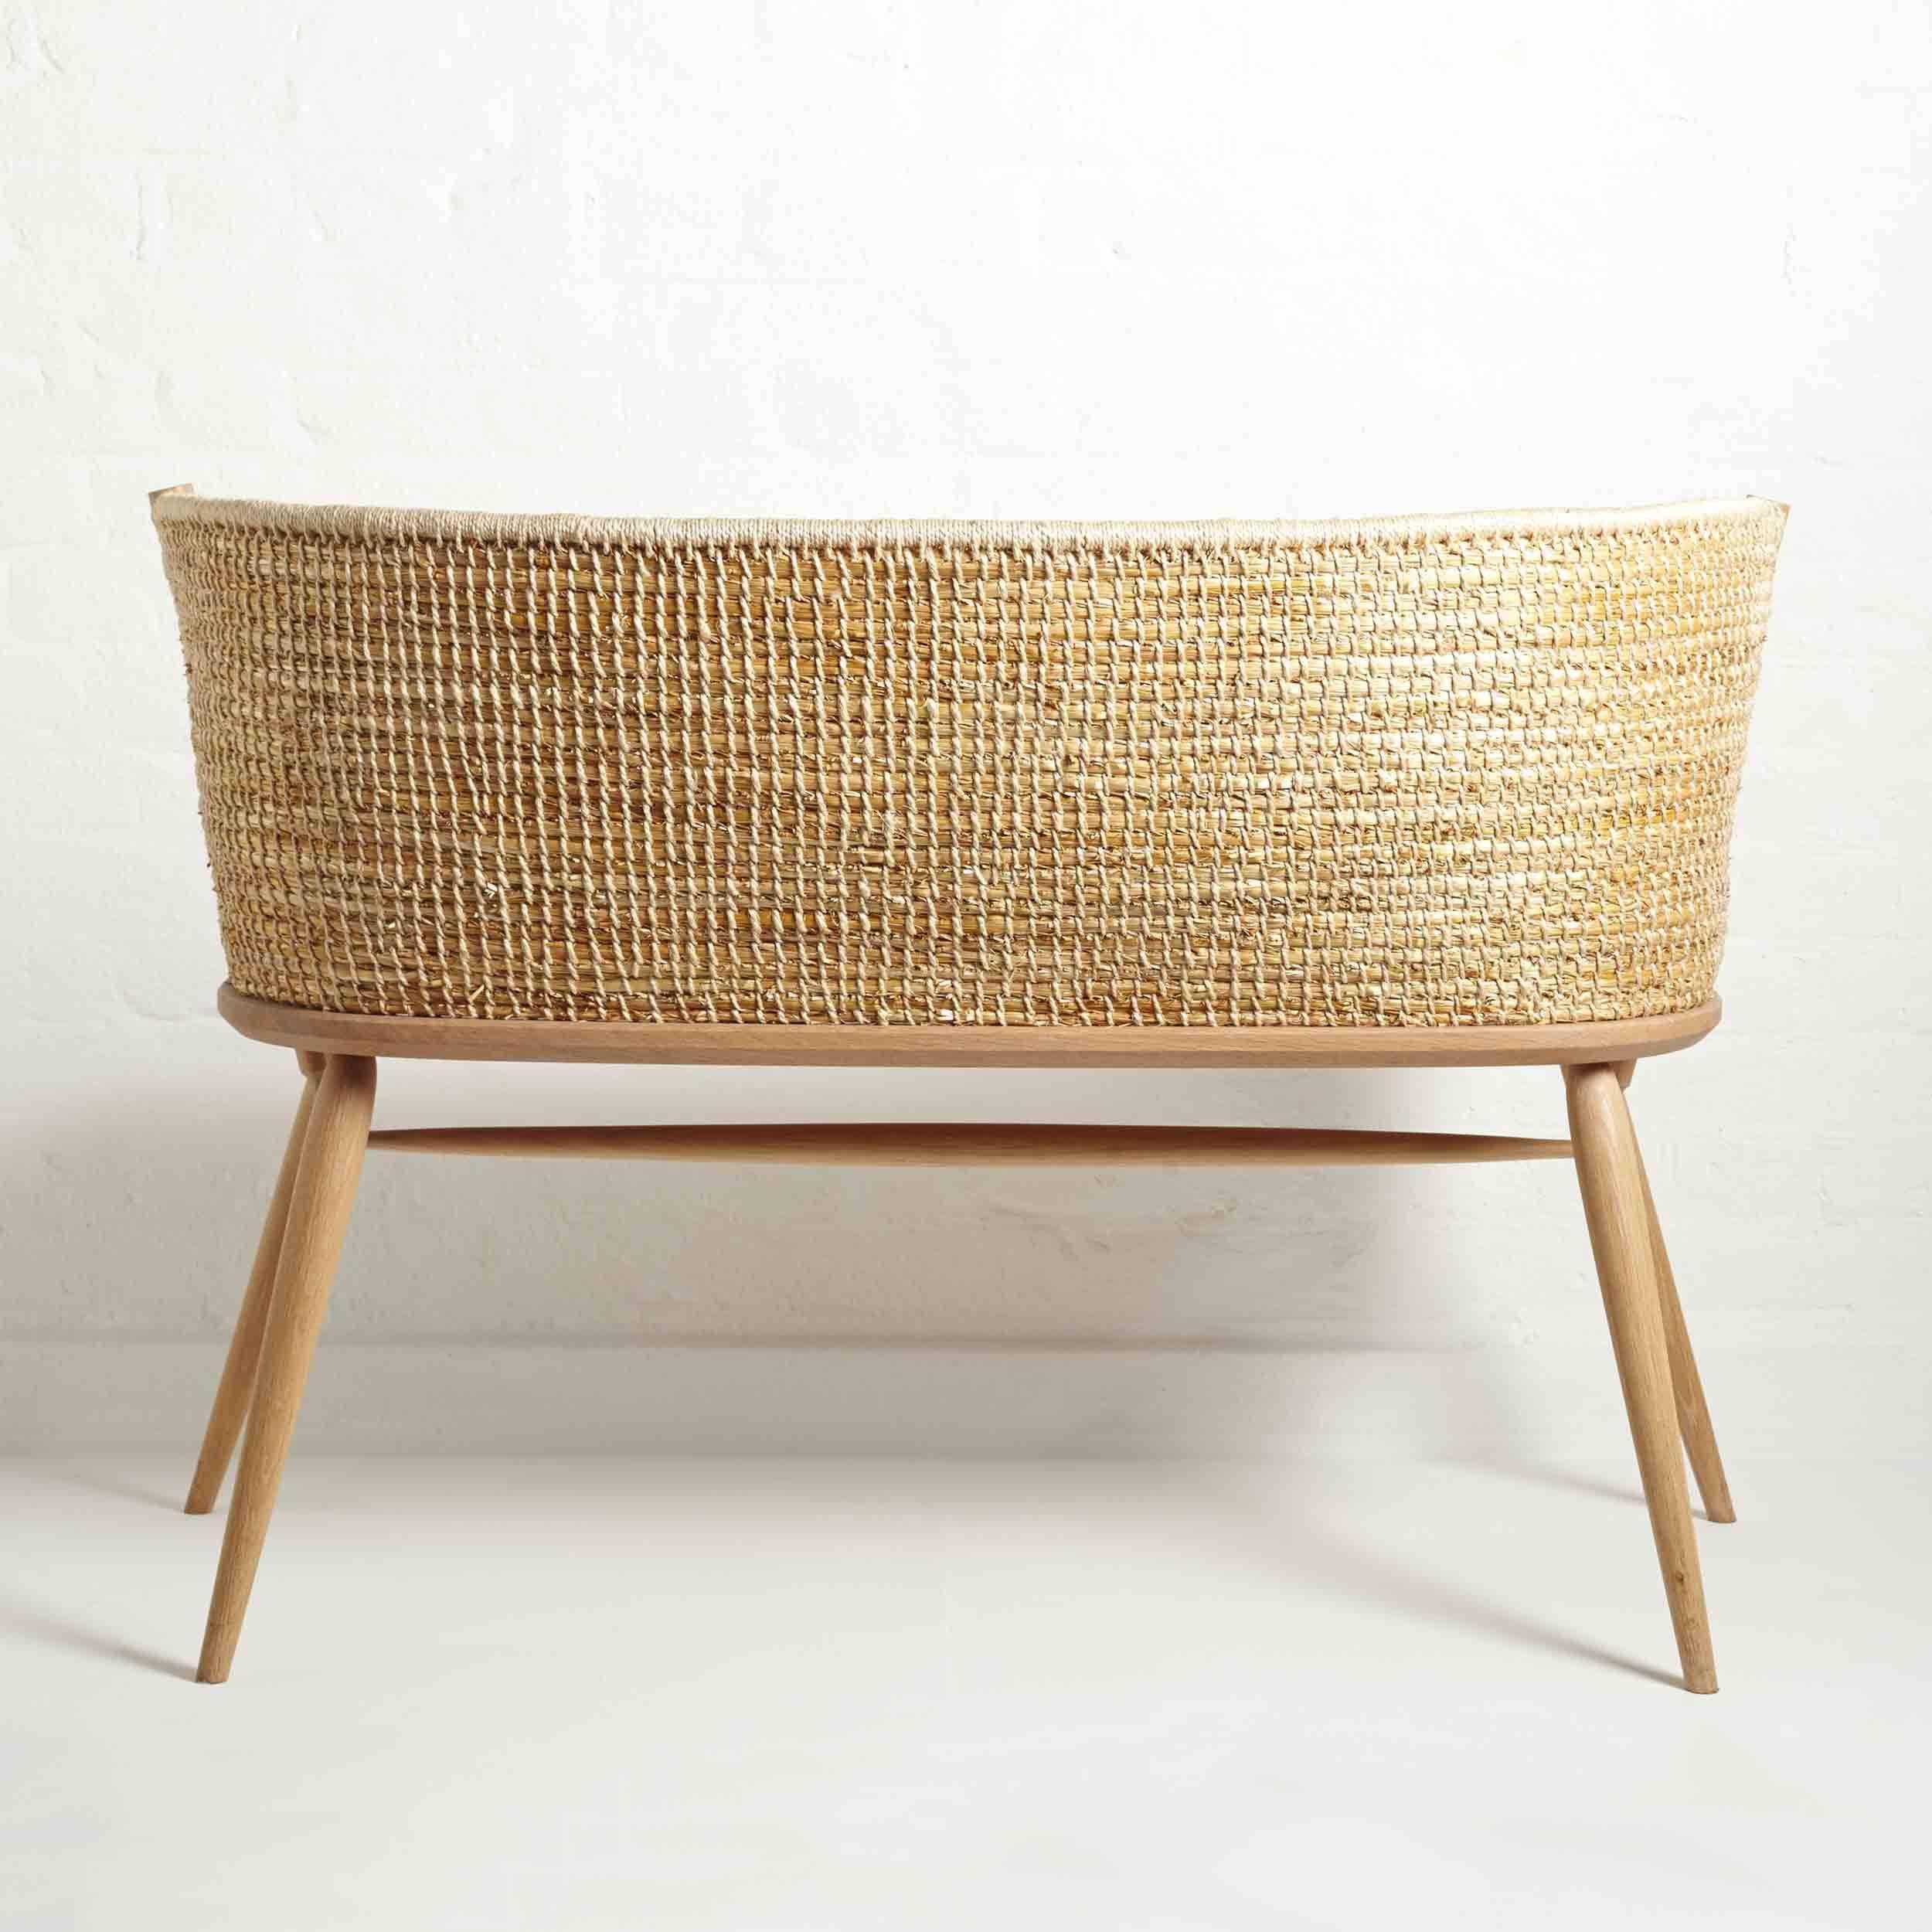 Handwoven Orkney Style Straw Brodgar Bench by Gareth Neal For Sale 1